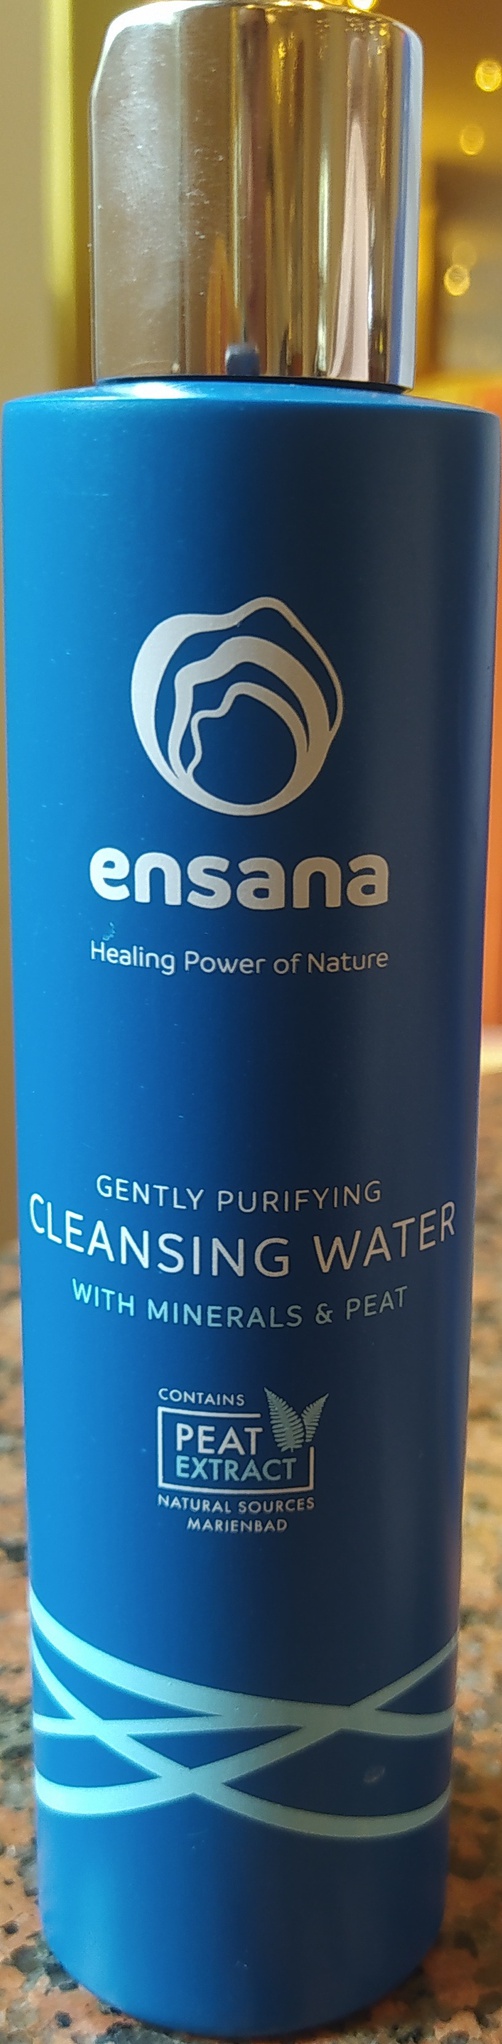 Ensana Gently Purifying Cleansing Water